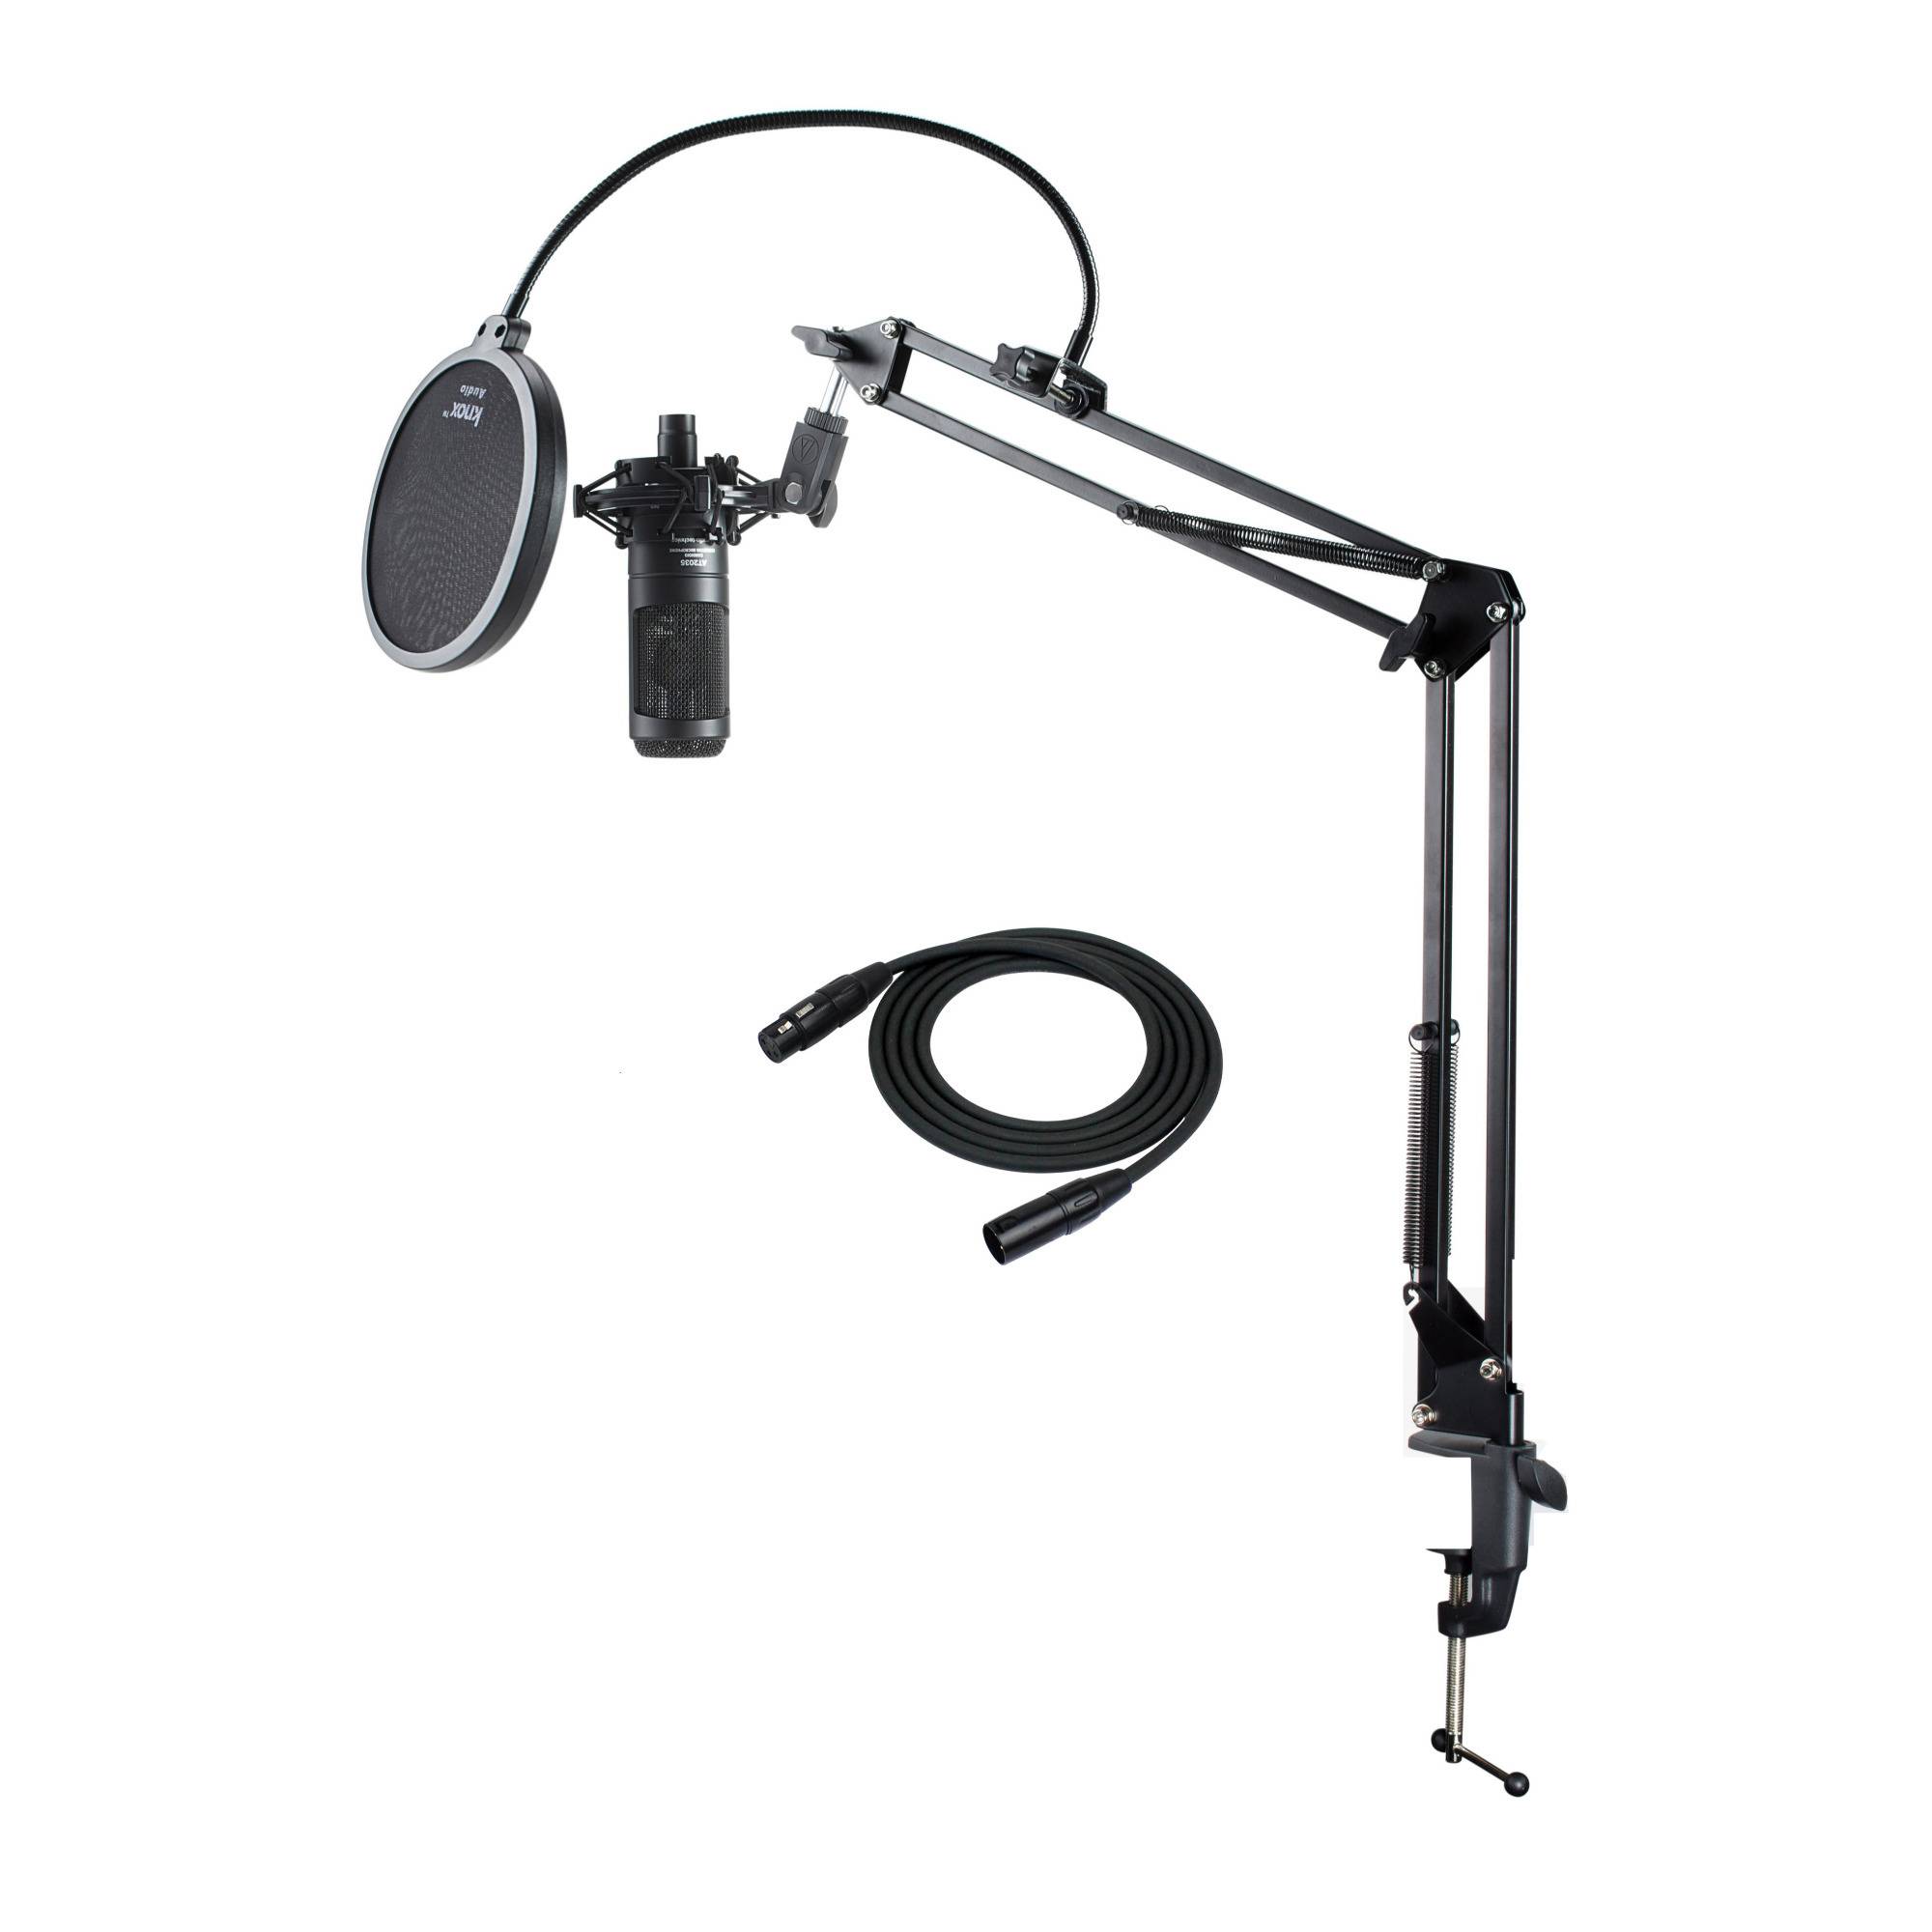 Audio Technica AT2035 Studio Condenser Microphone with Knox Filter and Accessory Bundle